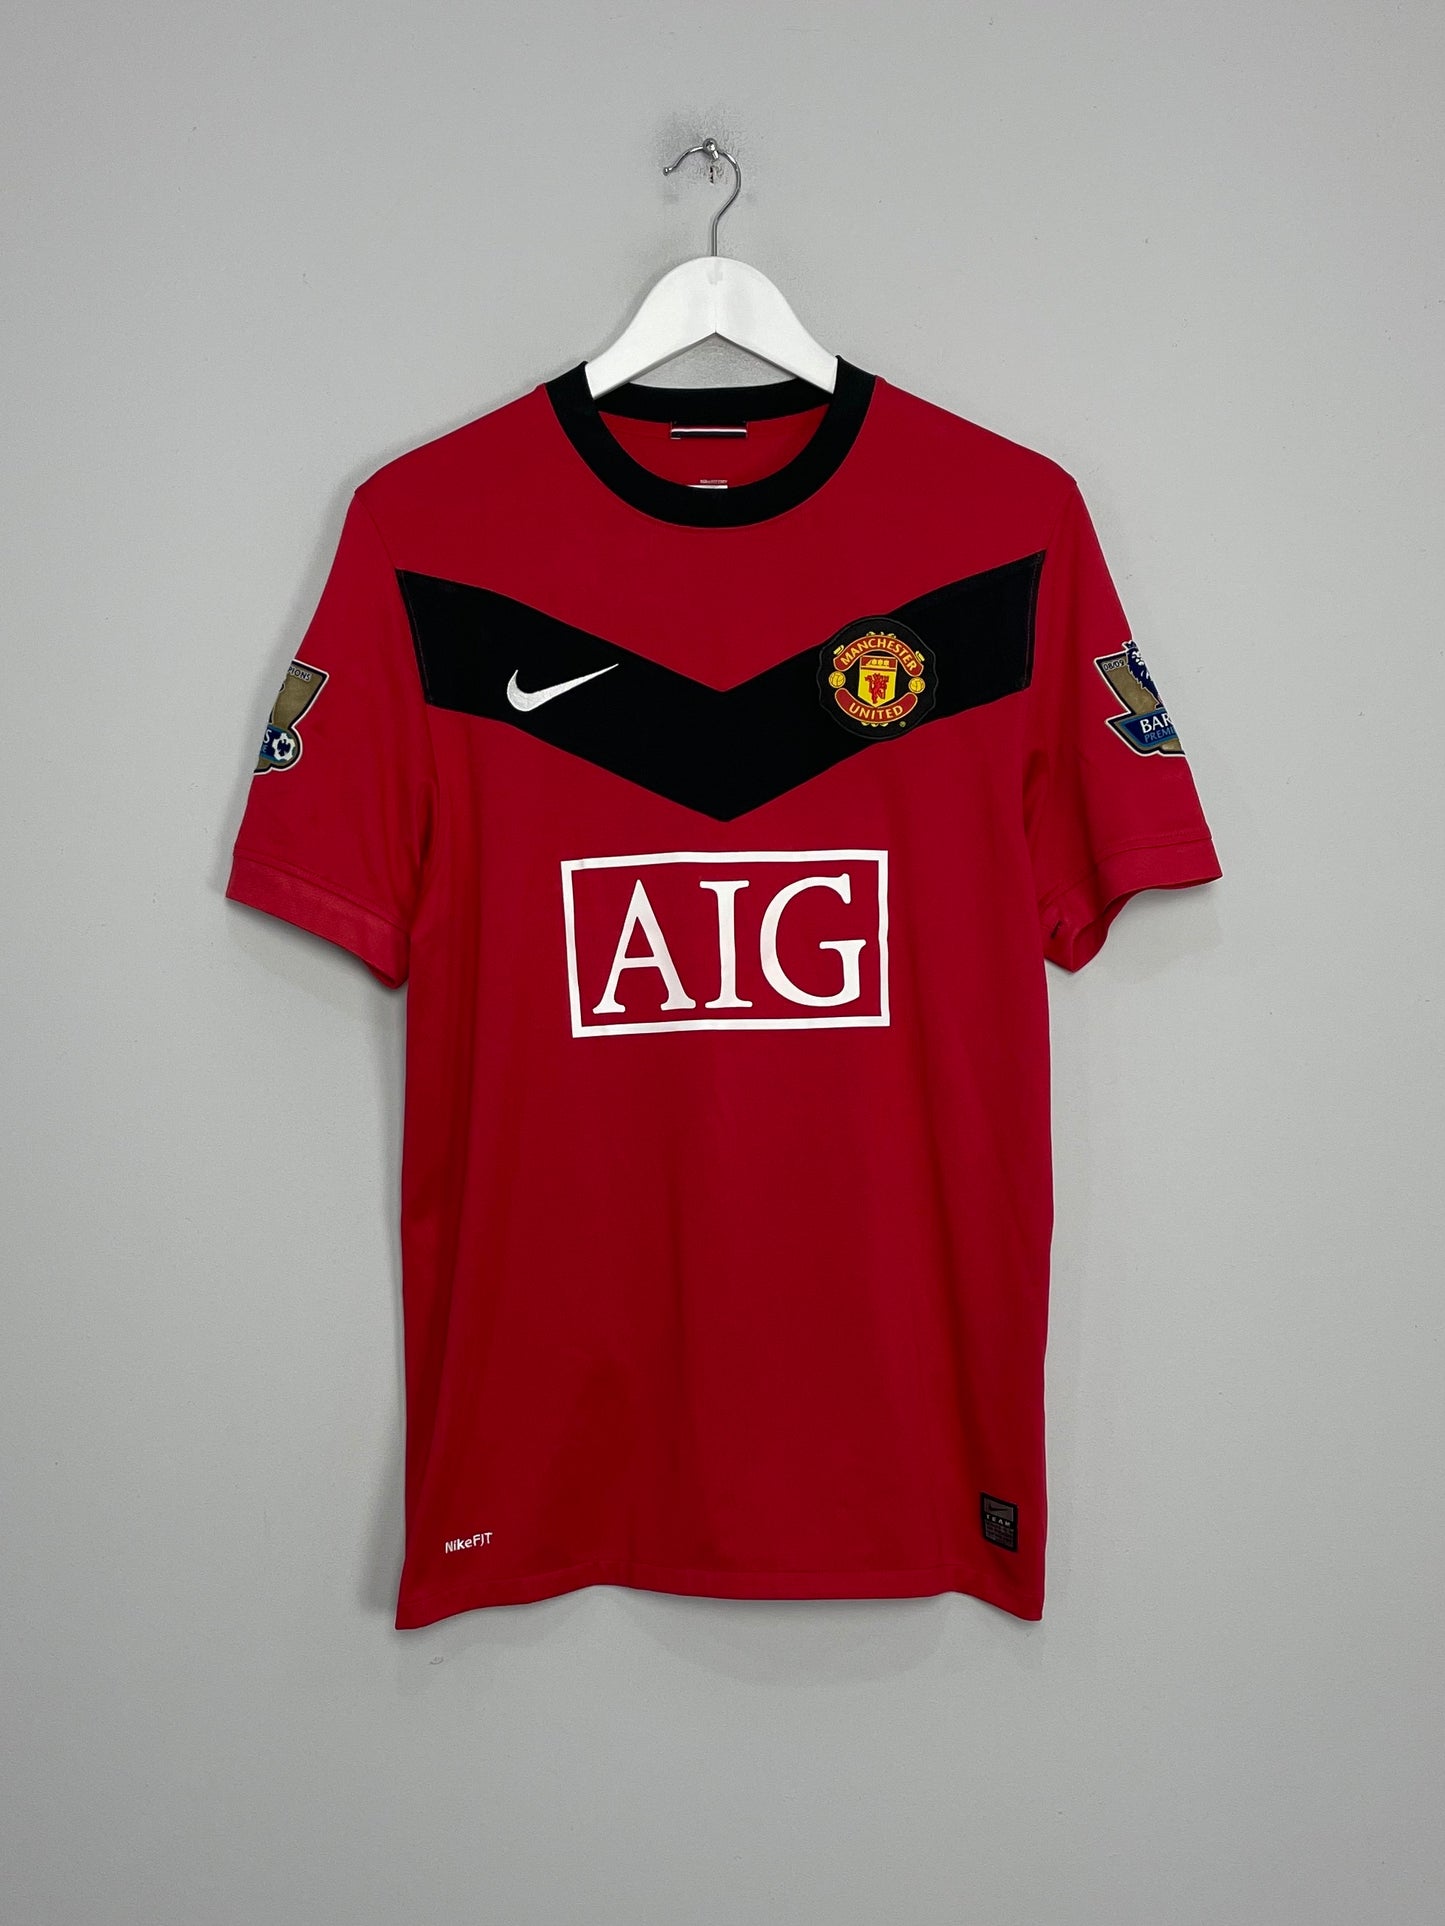 2009/10 MANCHESTER UNITED GIGGS #11 HOME SHIRT (M) NIKE